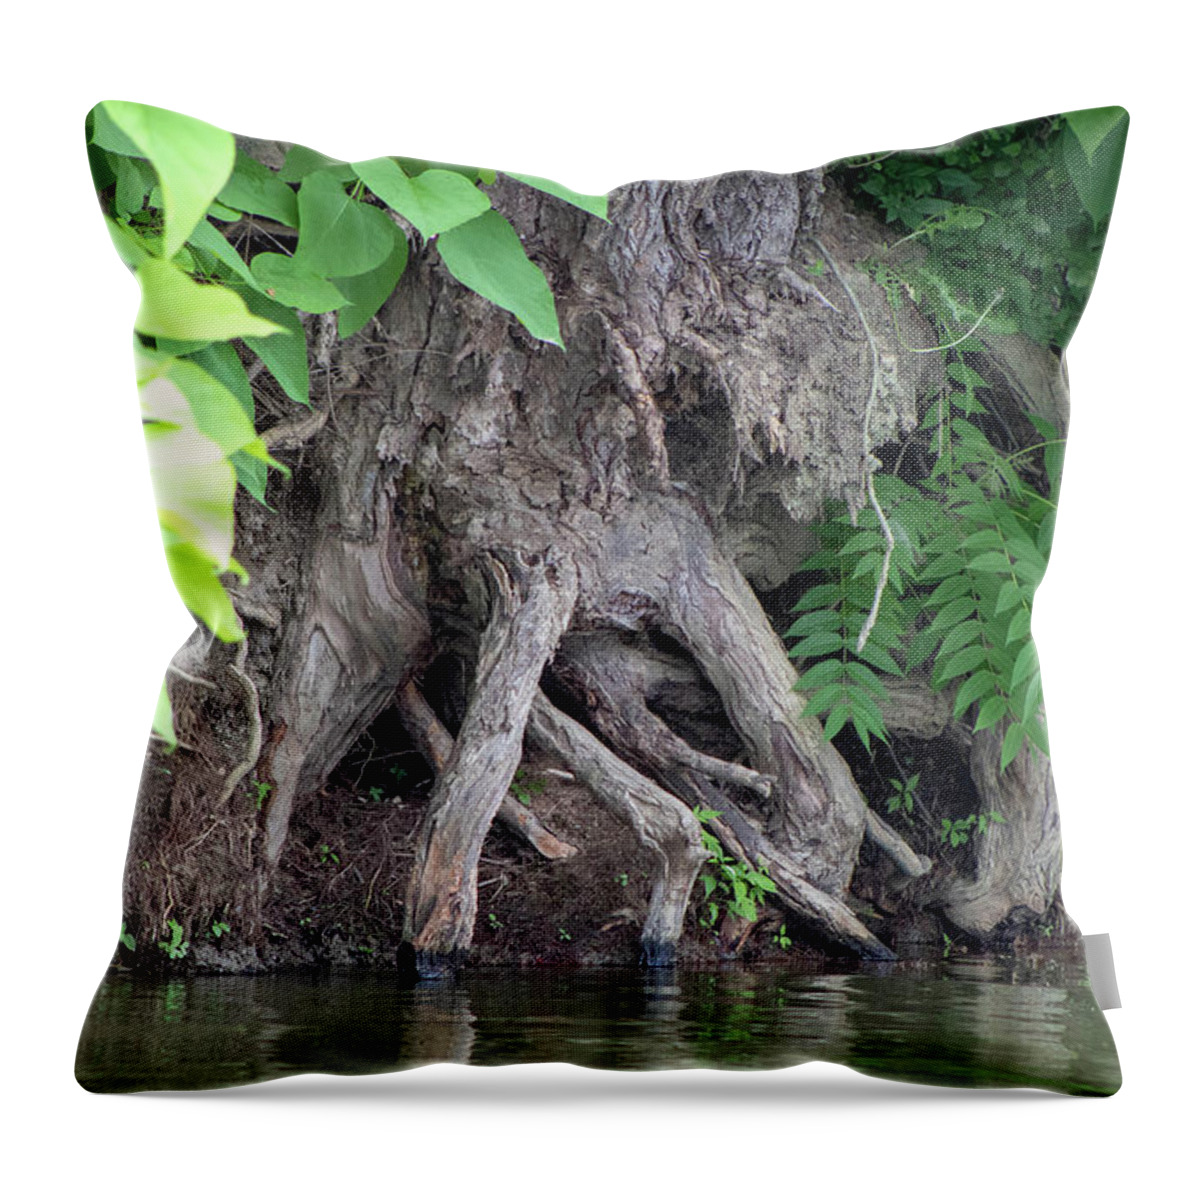  Throw Pillow featuring the photograph Island Tree by Brian Jones